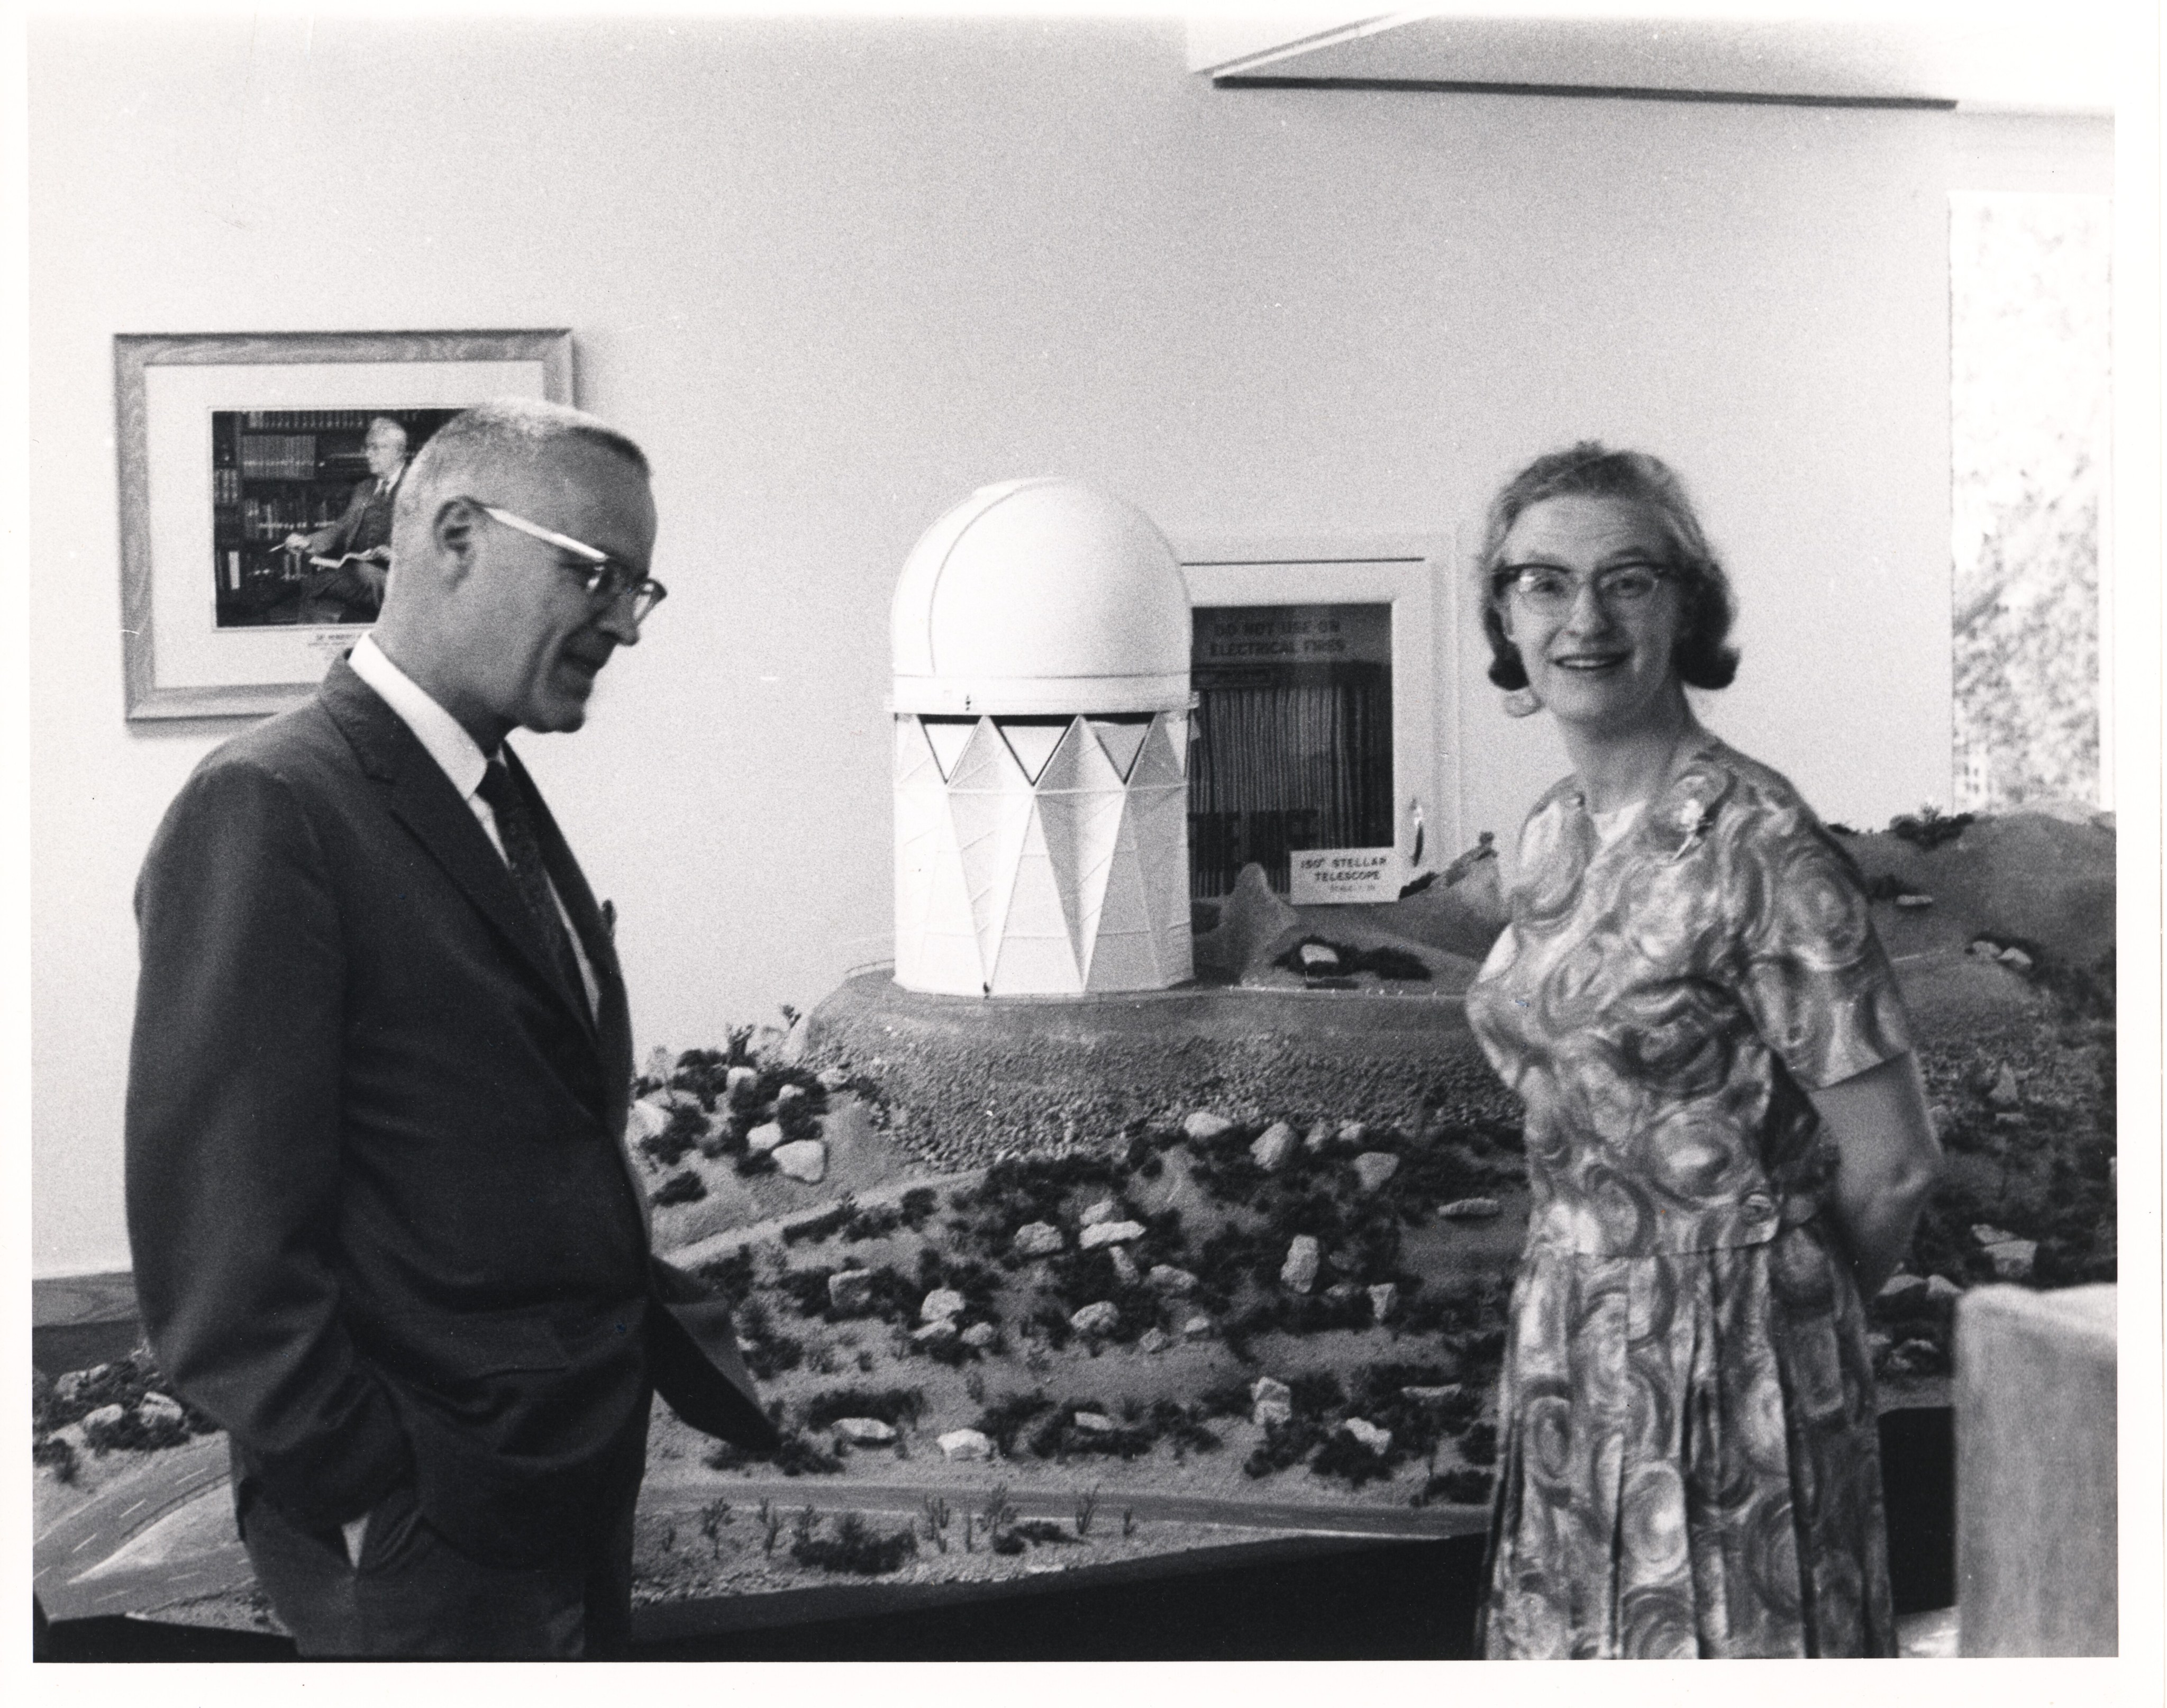 Nancy Grace Roman and NASA's Associate Adminstrator for Science and Application stand in front of a model of Kitt Peak National Observatory and talk.